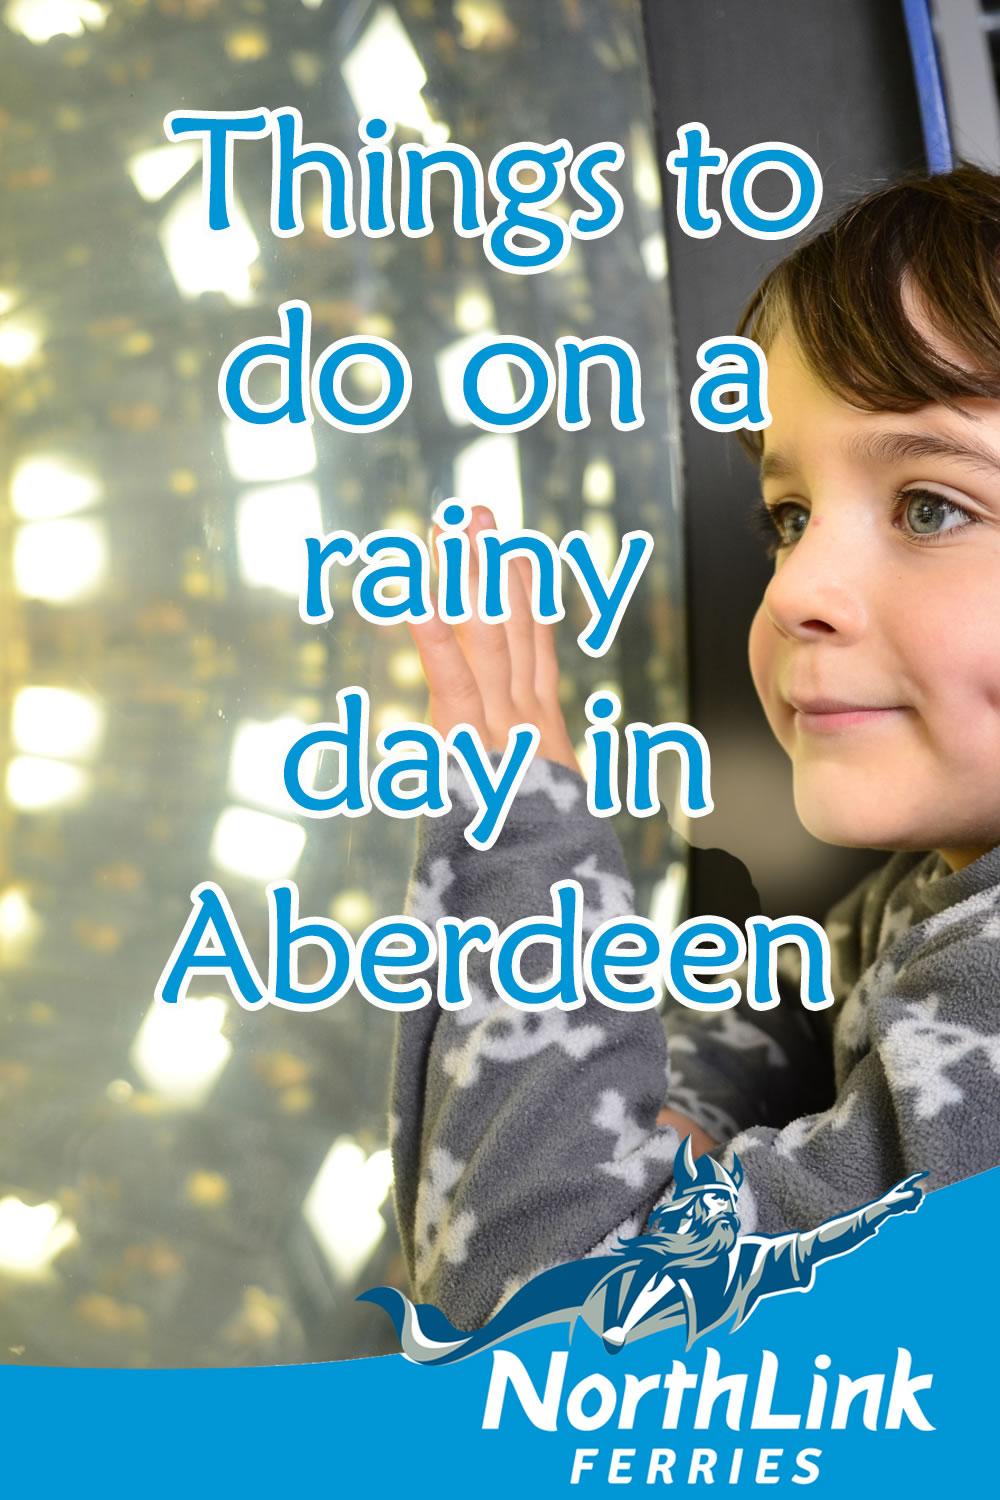 Things to do on a rainy day in Aberdeen